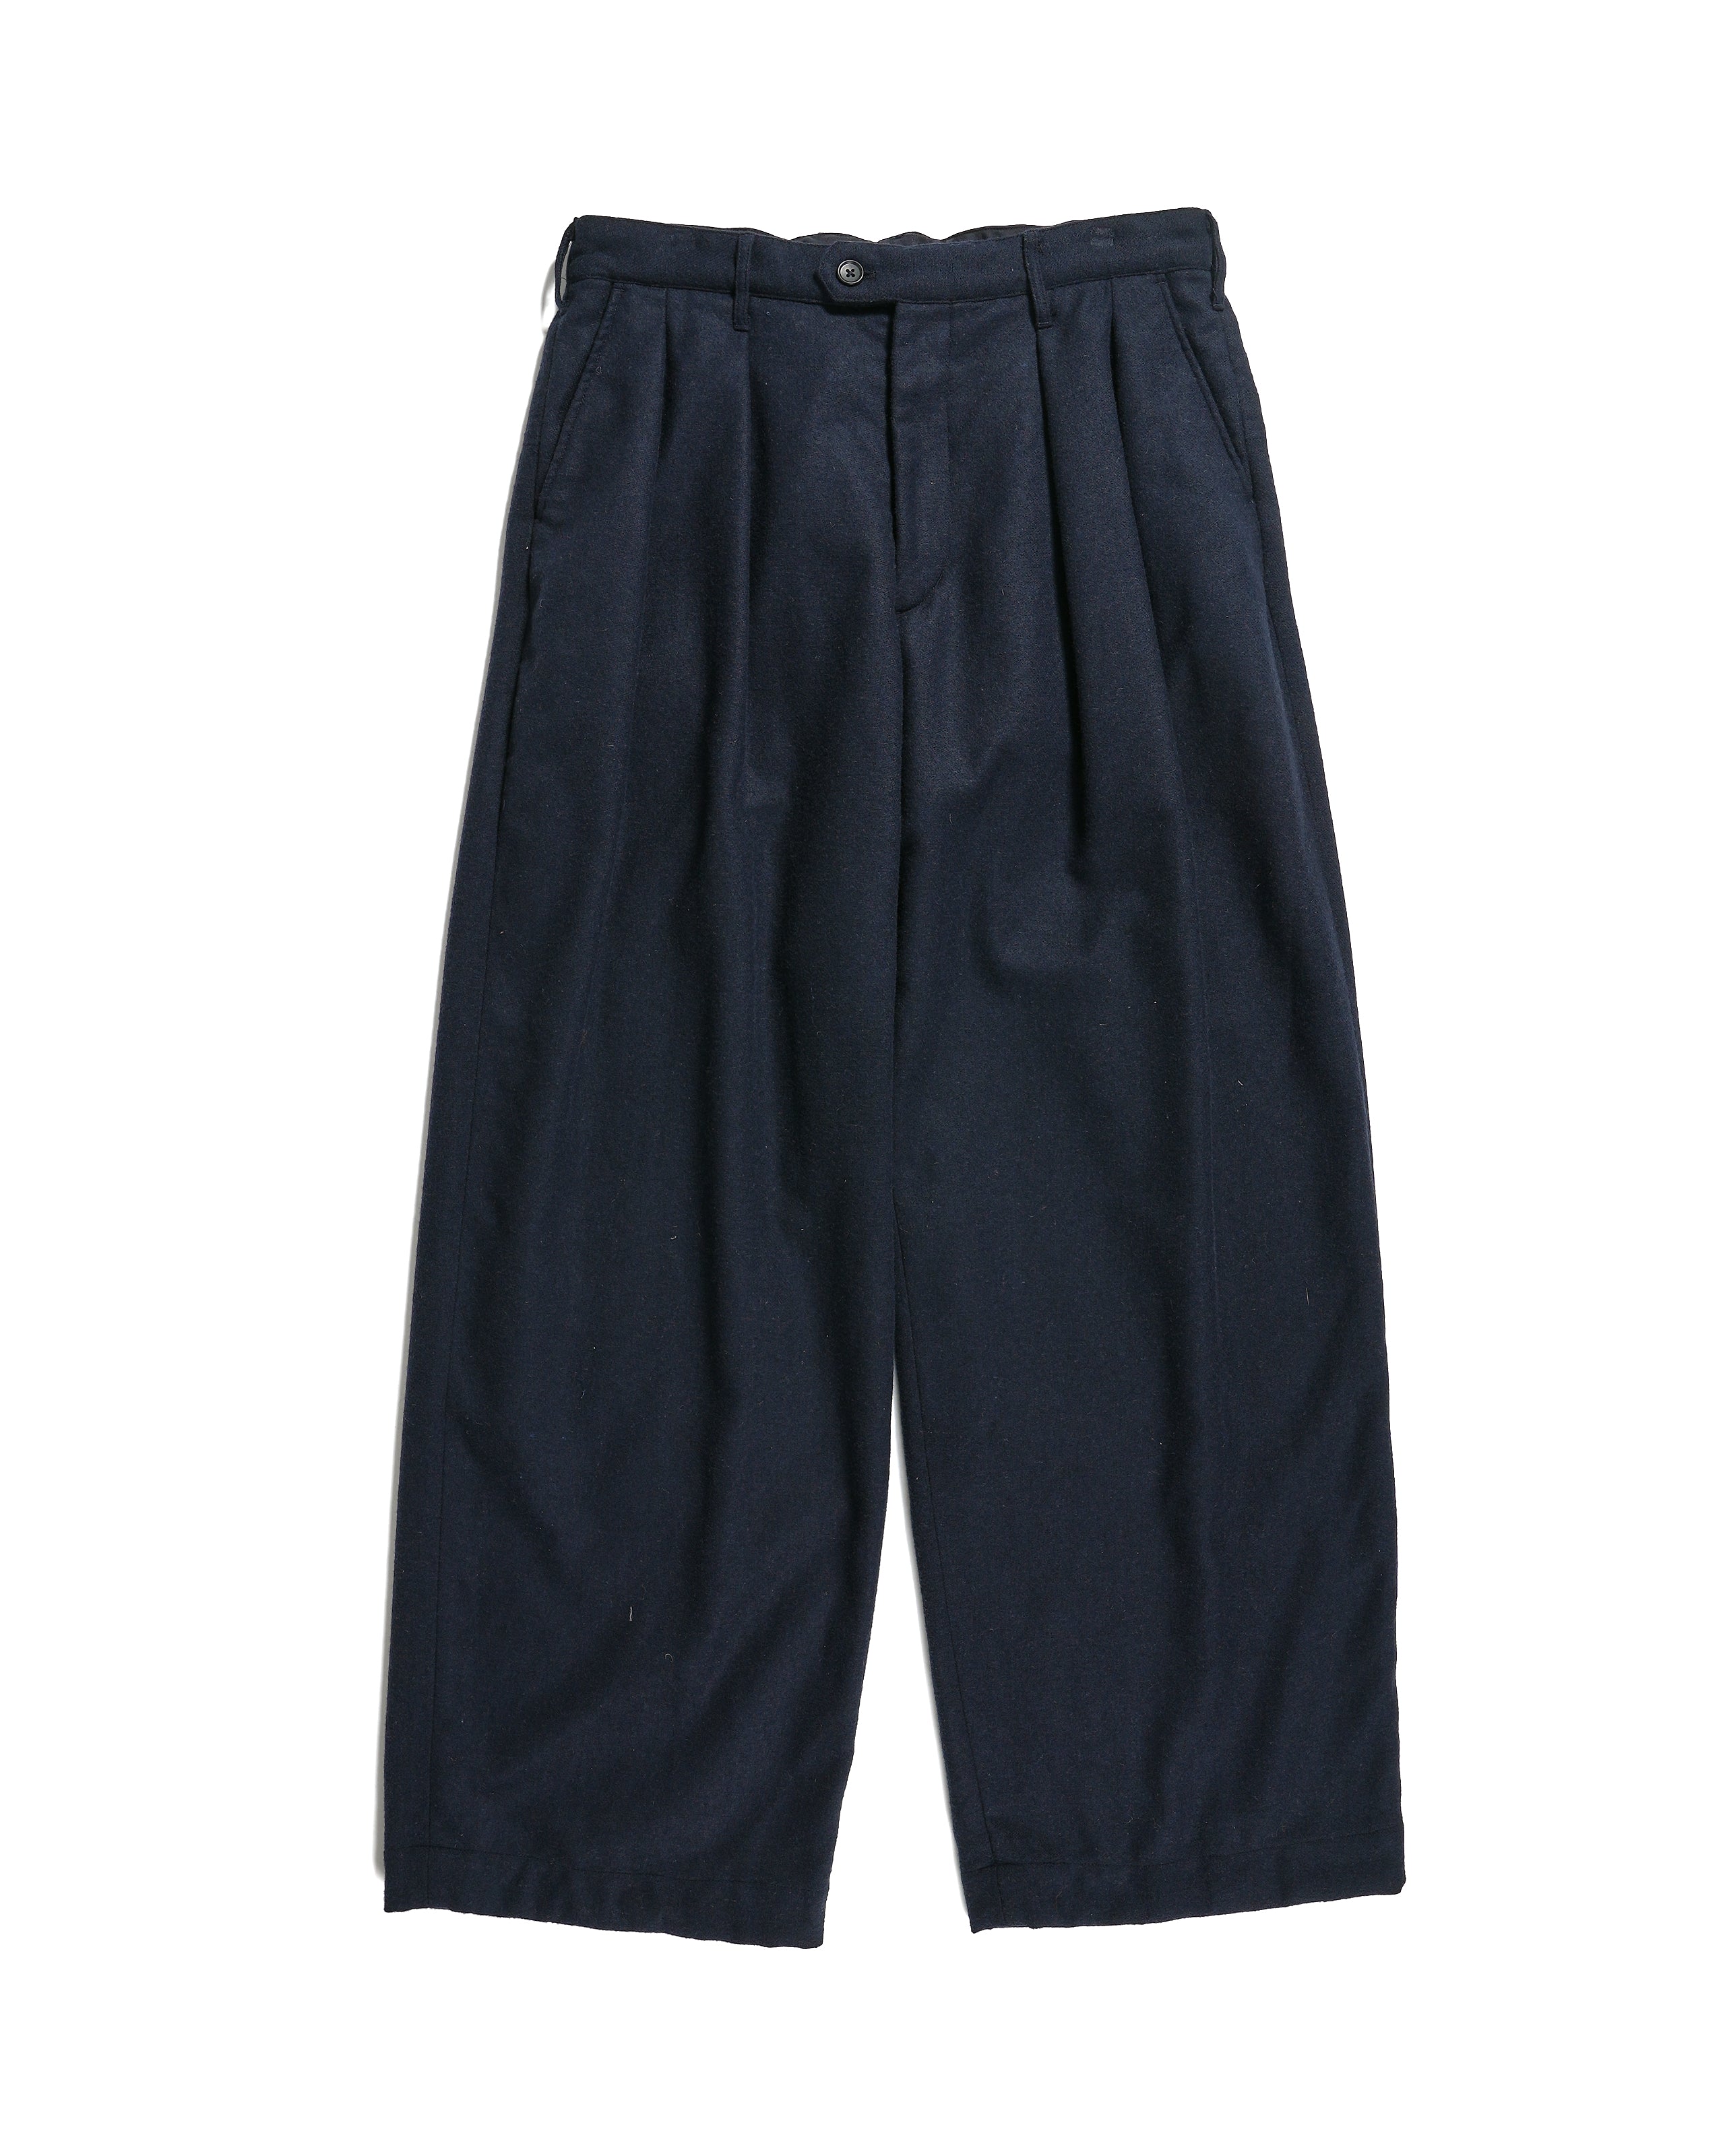 Engineered Garments Oxford Pant - Navy Solid Poly Wool Flannel